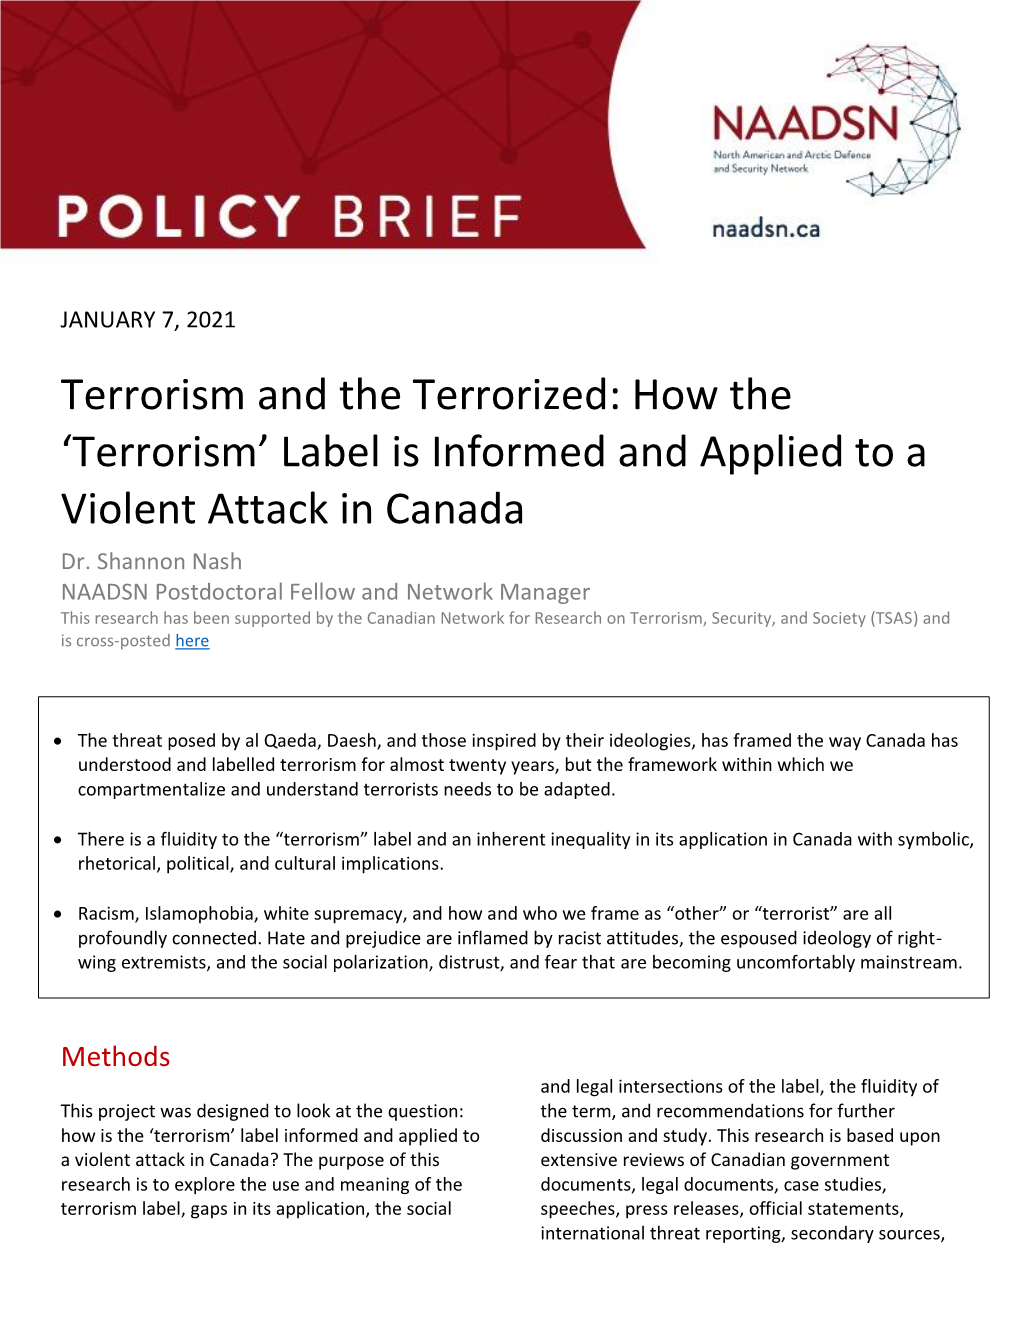 Terrorism and the Terrorized: How the ‘Terrorism’ Label Is Informed and Applied to a Violent Attack in Canada Dr